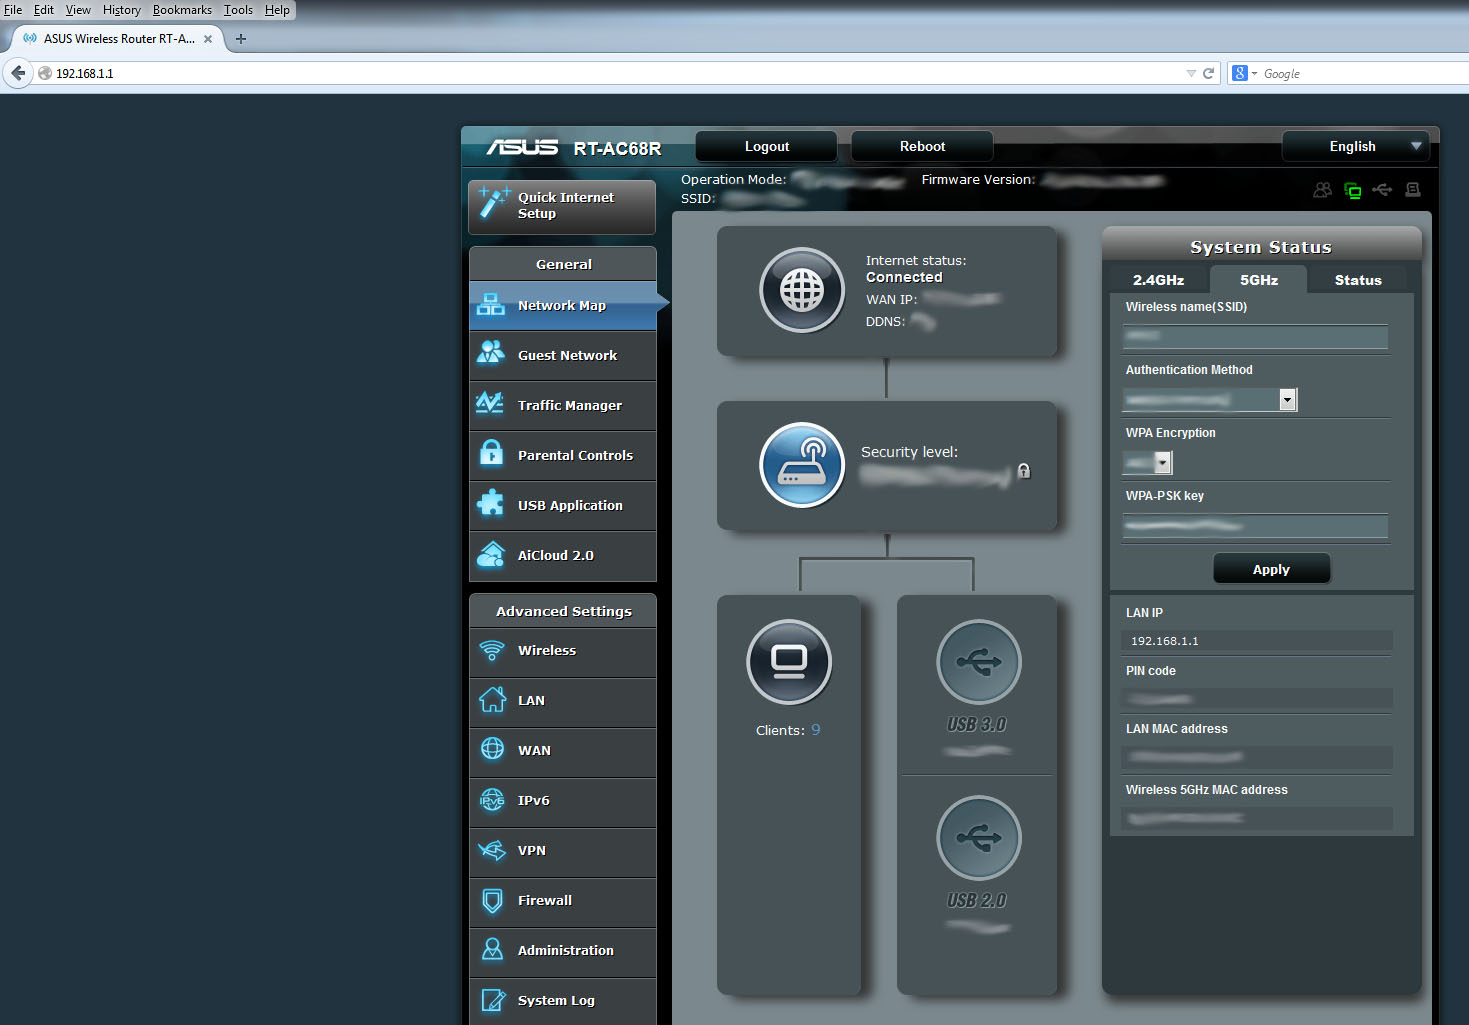 Using Mozilla Firefox to Administrate the ASUS Router.